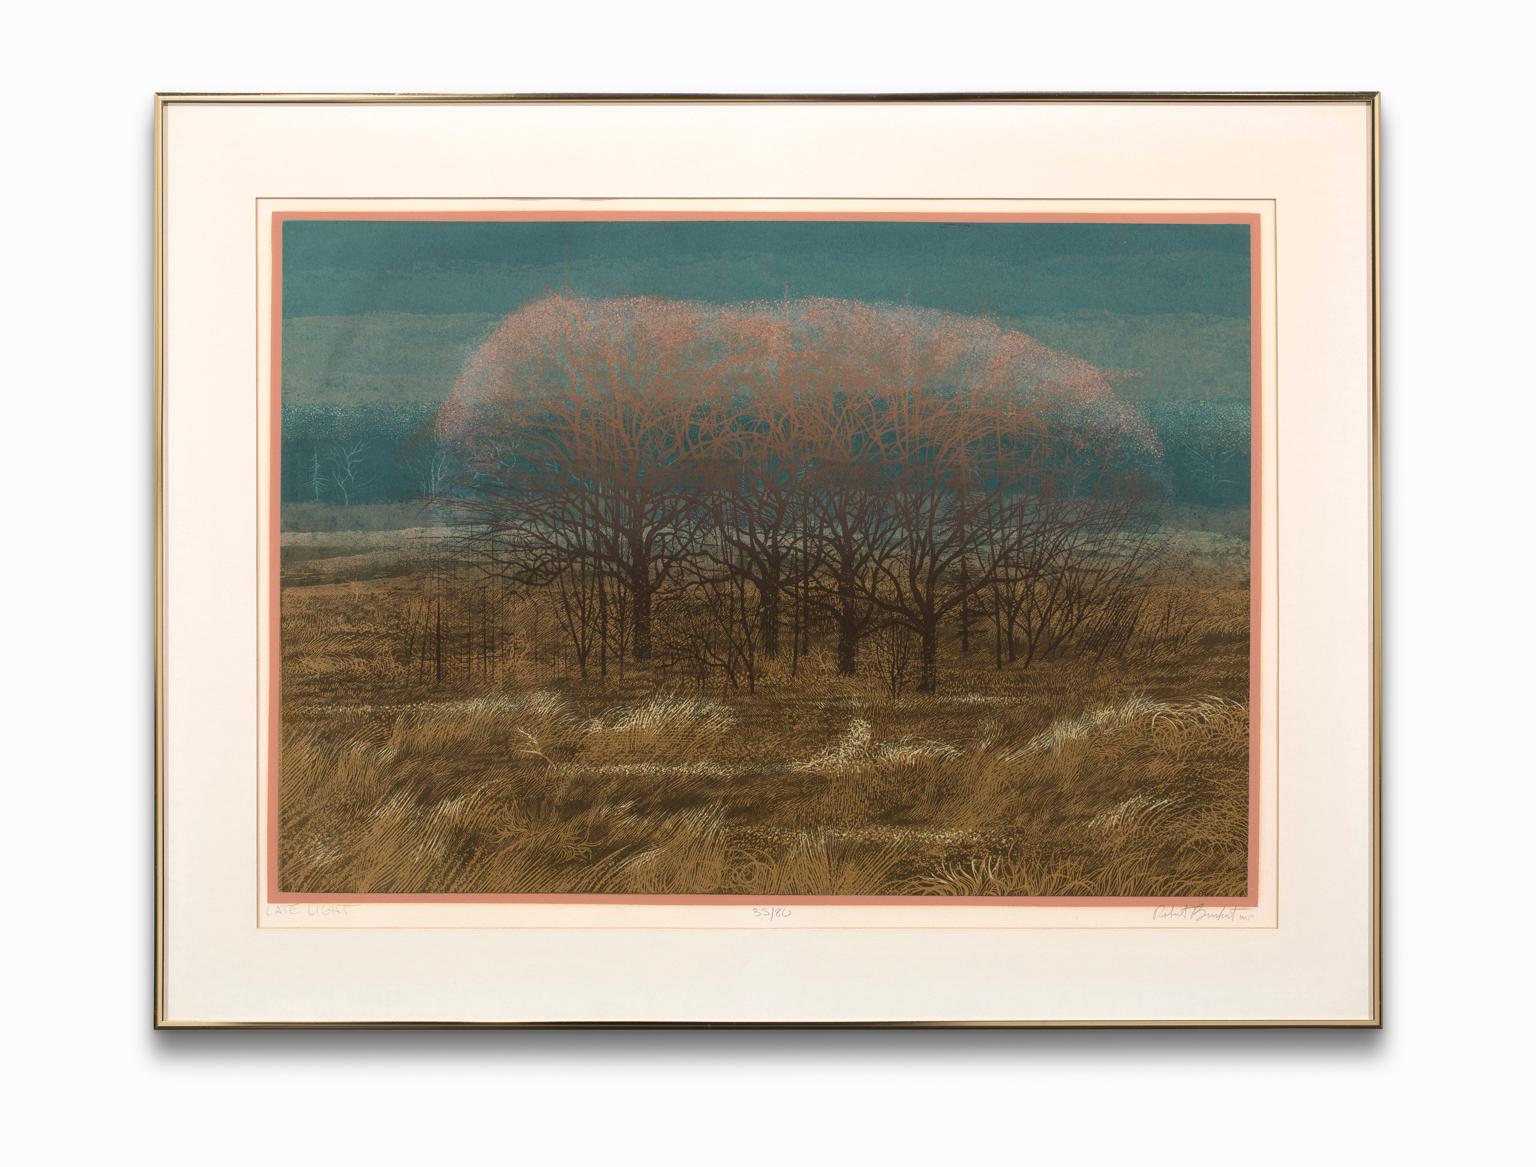 "Late Light" by Robert Burkert is a lithograph landscape by the master printmaker that depicts a clearing with autumn/winter trees in the subtle but vibrant colors of the sun's last light at dusk. The work is very keeping in his interests in